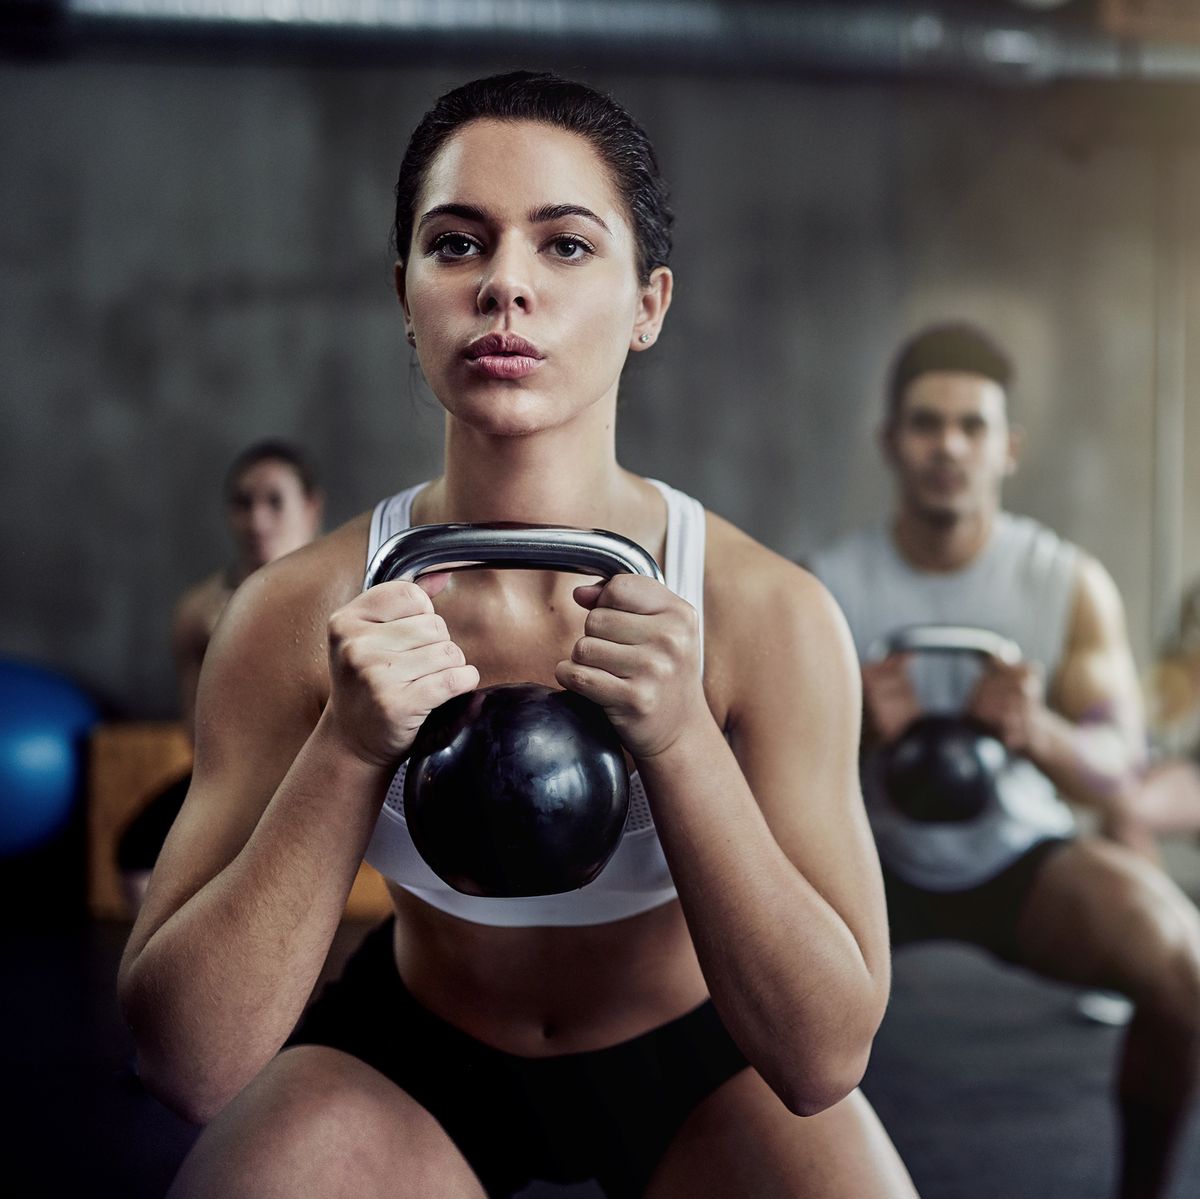 Burning calories and strengthening her core with a kettlebell